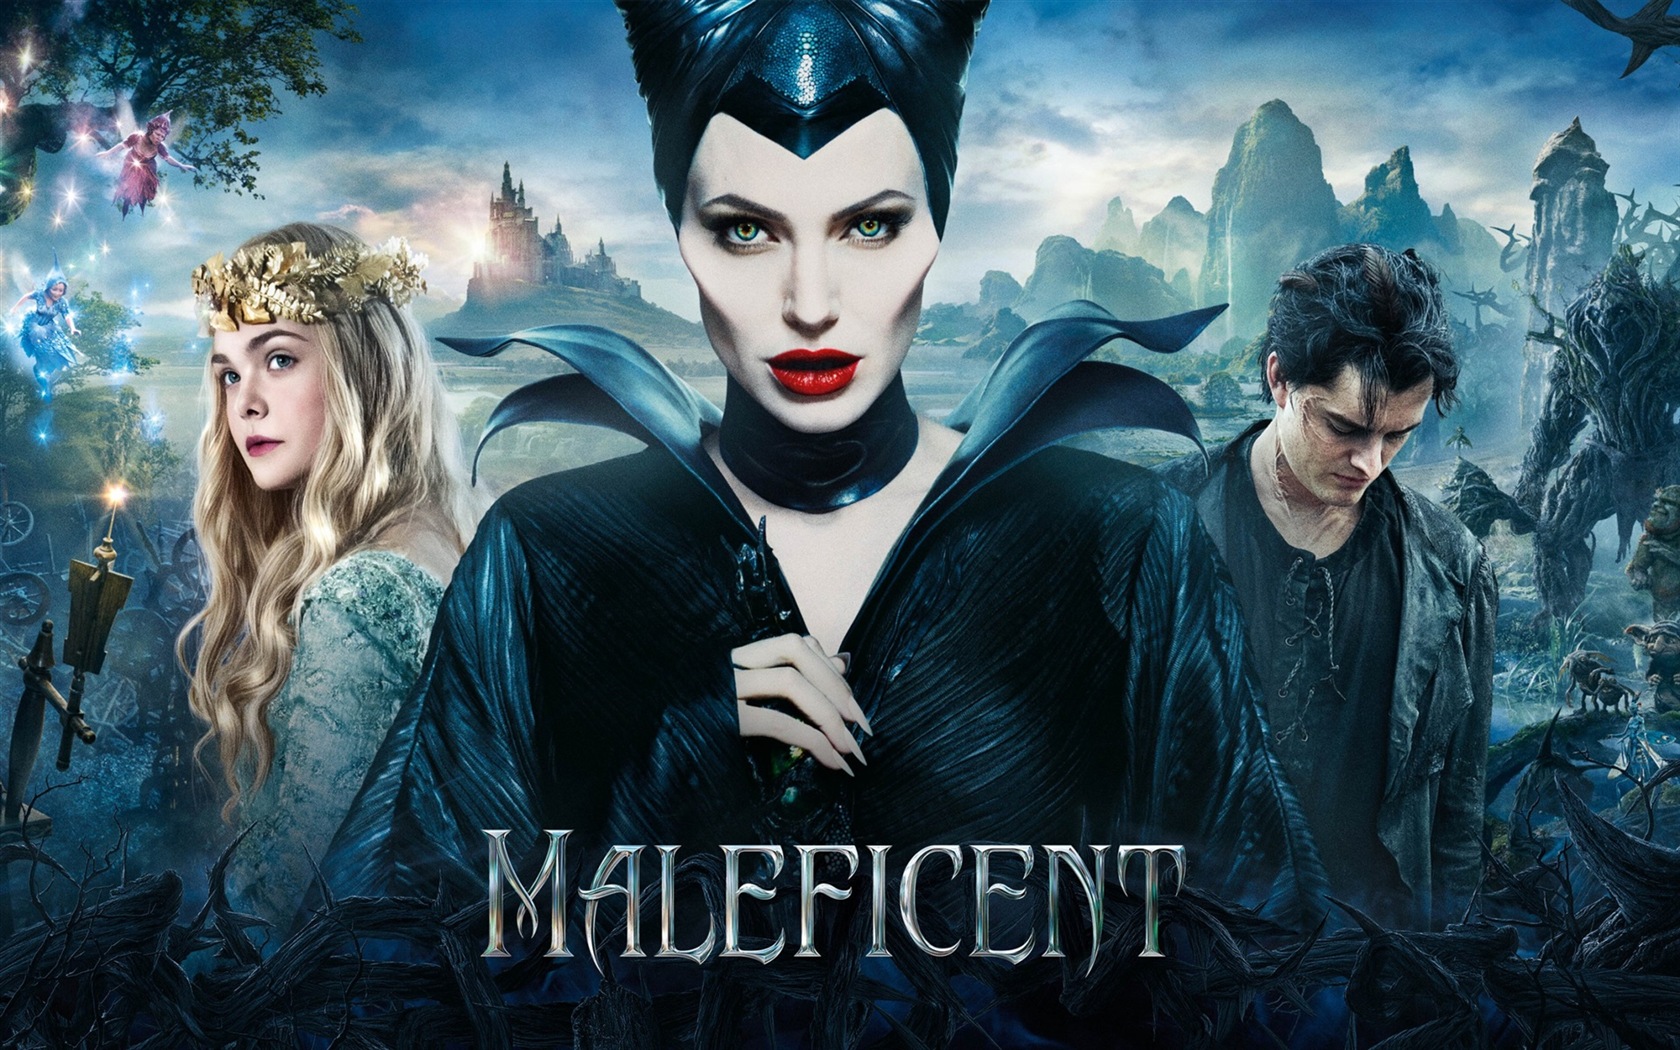 Maleficent 2014 HD movie wallpapers #1 - 1680x1050